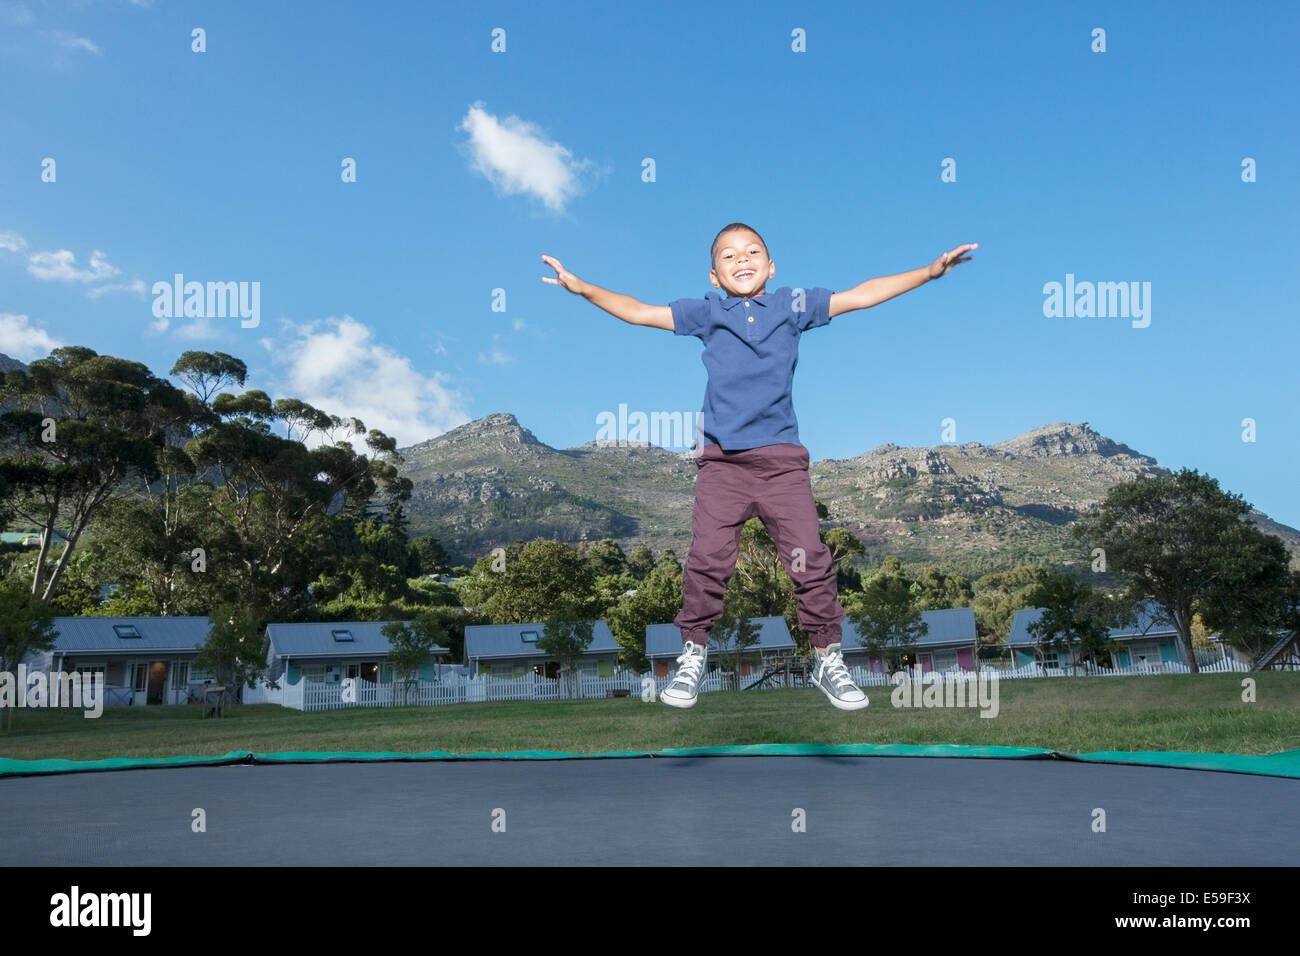 Boy jumping on trampoline outdoors Stock Photo